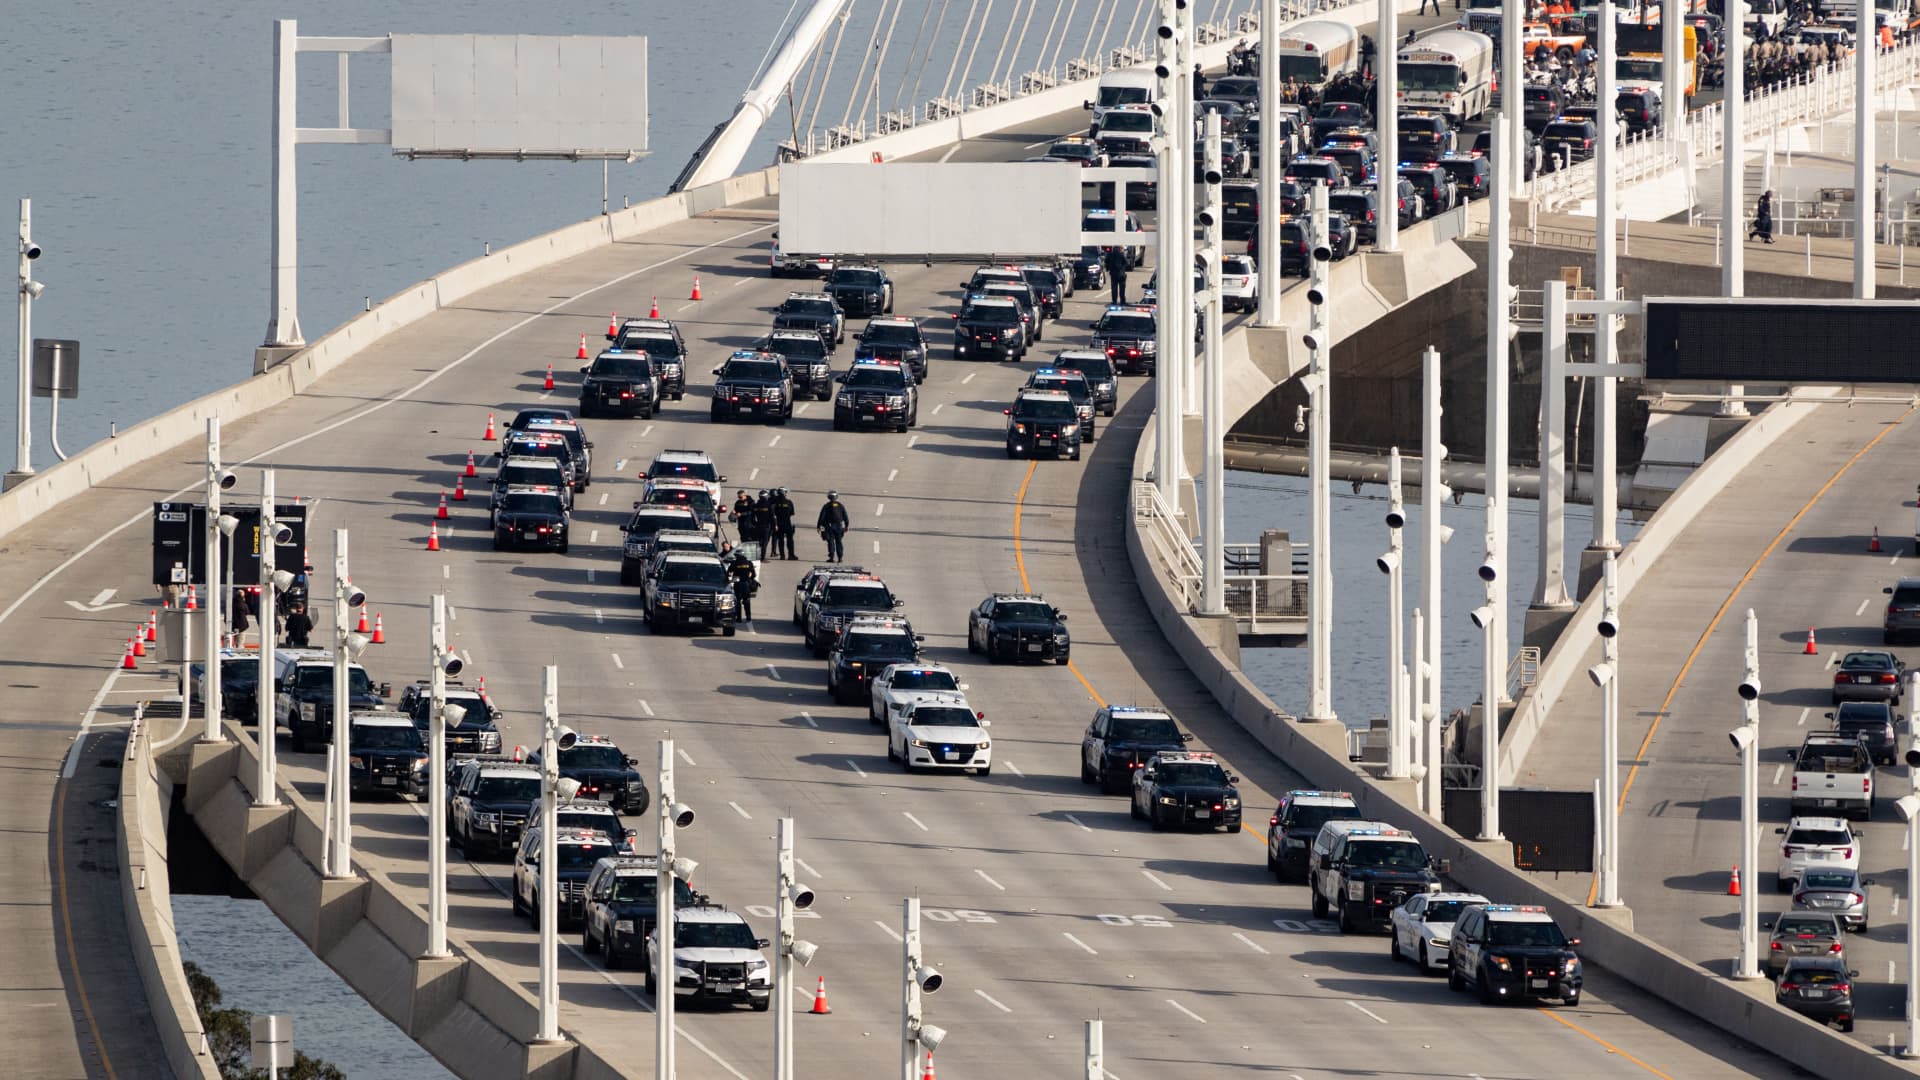 Police respond to protestors who shut down westbound lanes on the eastern span of the Bay Bridge during the Asia-Pacific Econonmic Cooperation (APEC) summit in San Francisco, California, on November 16, 2023. The APEC Summit takes place through November 17. (Photo by Jason Henry / AFP) (Photo by JASON HENRY/AFP via Getty Images)